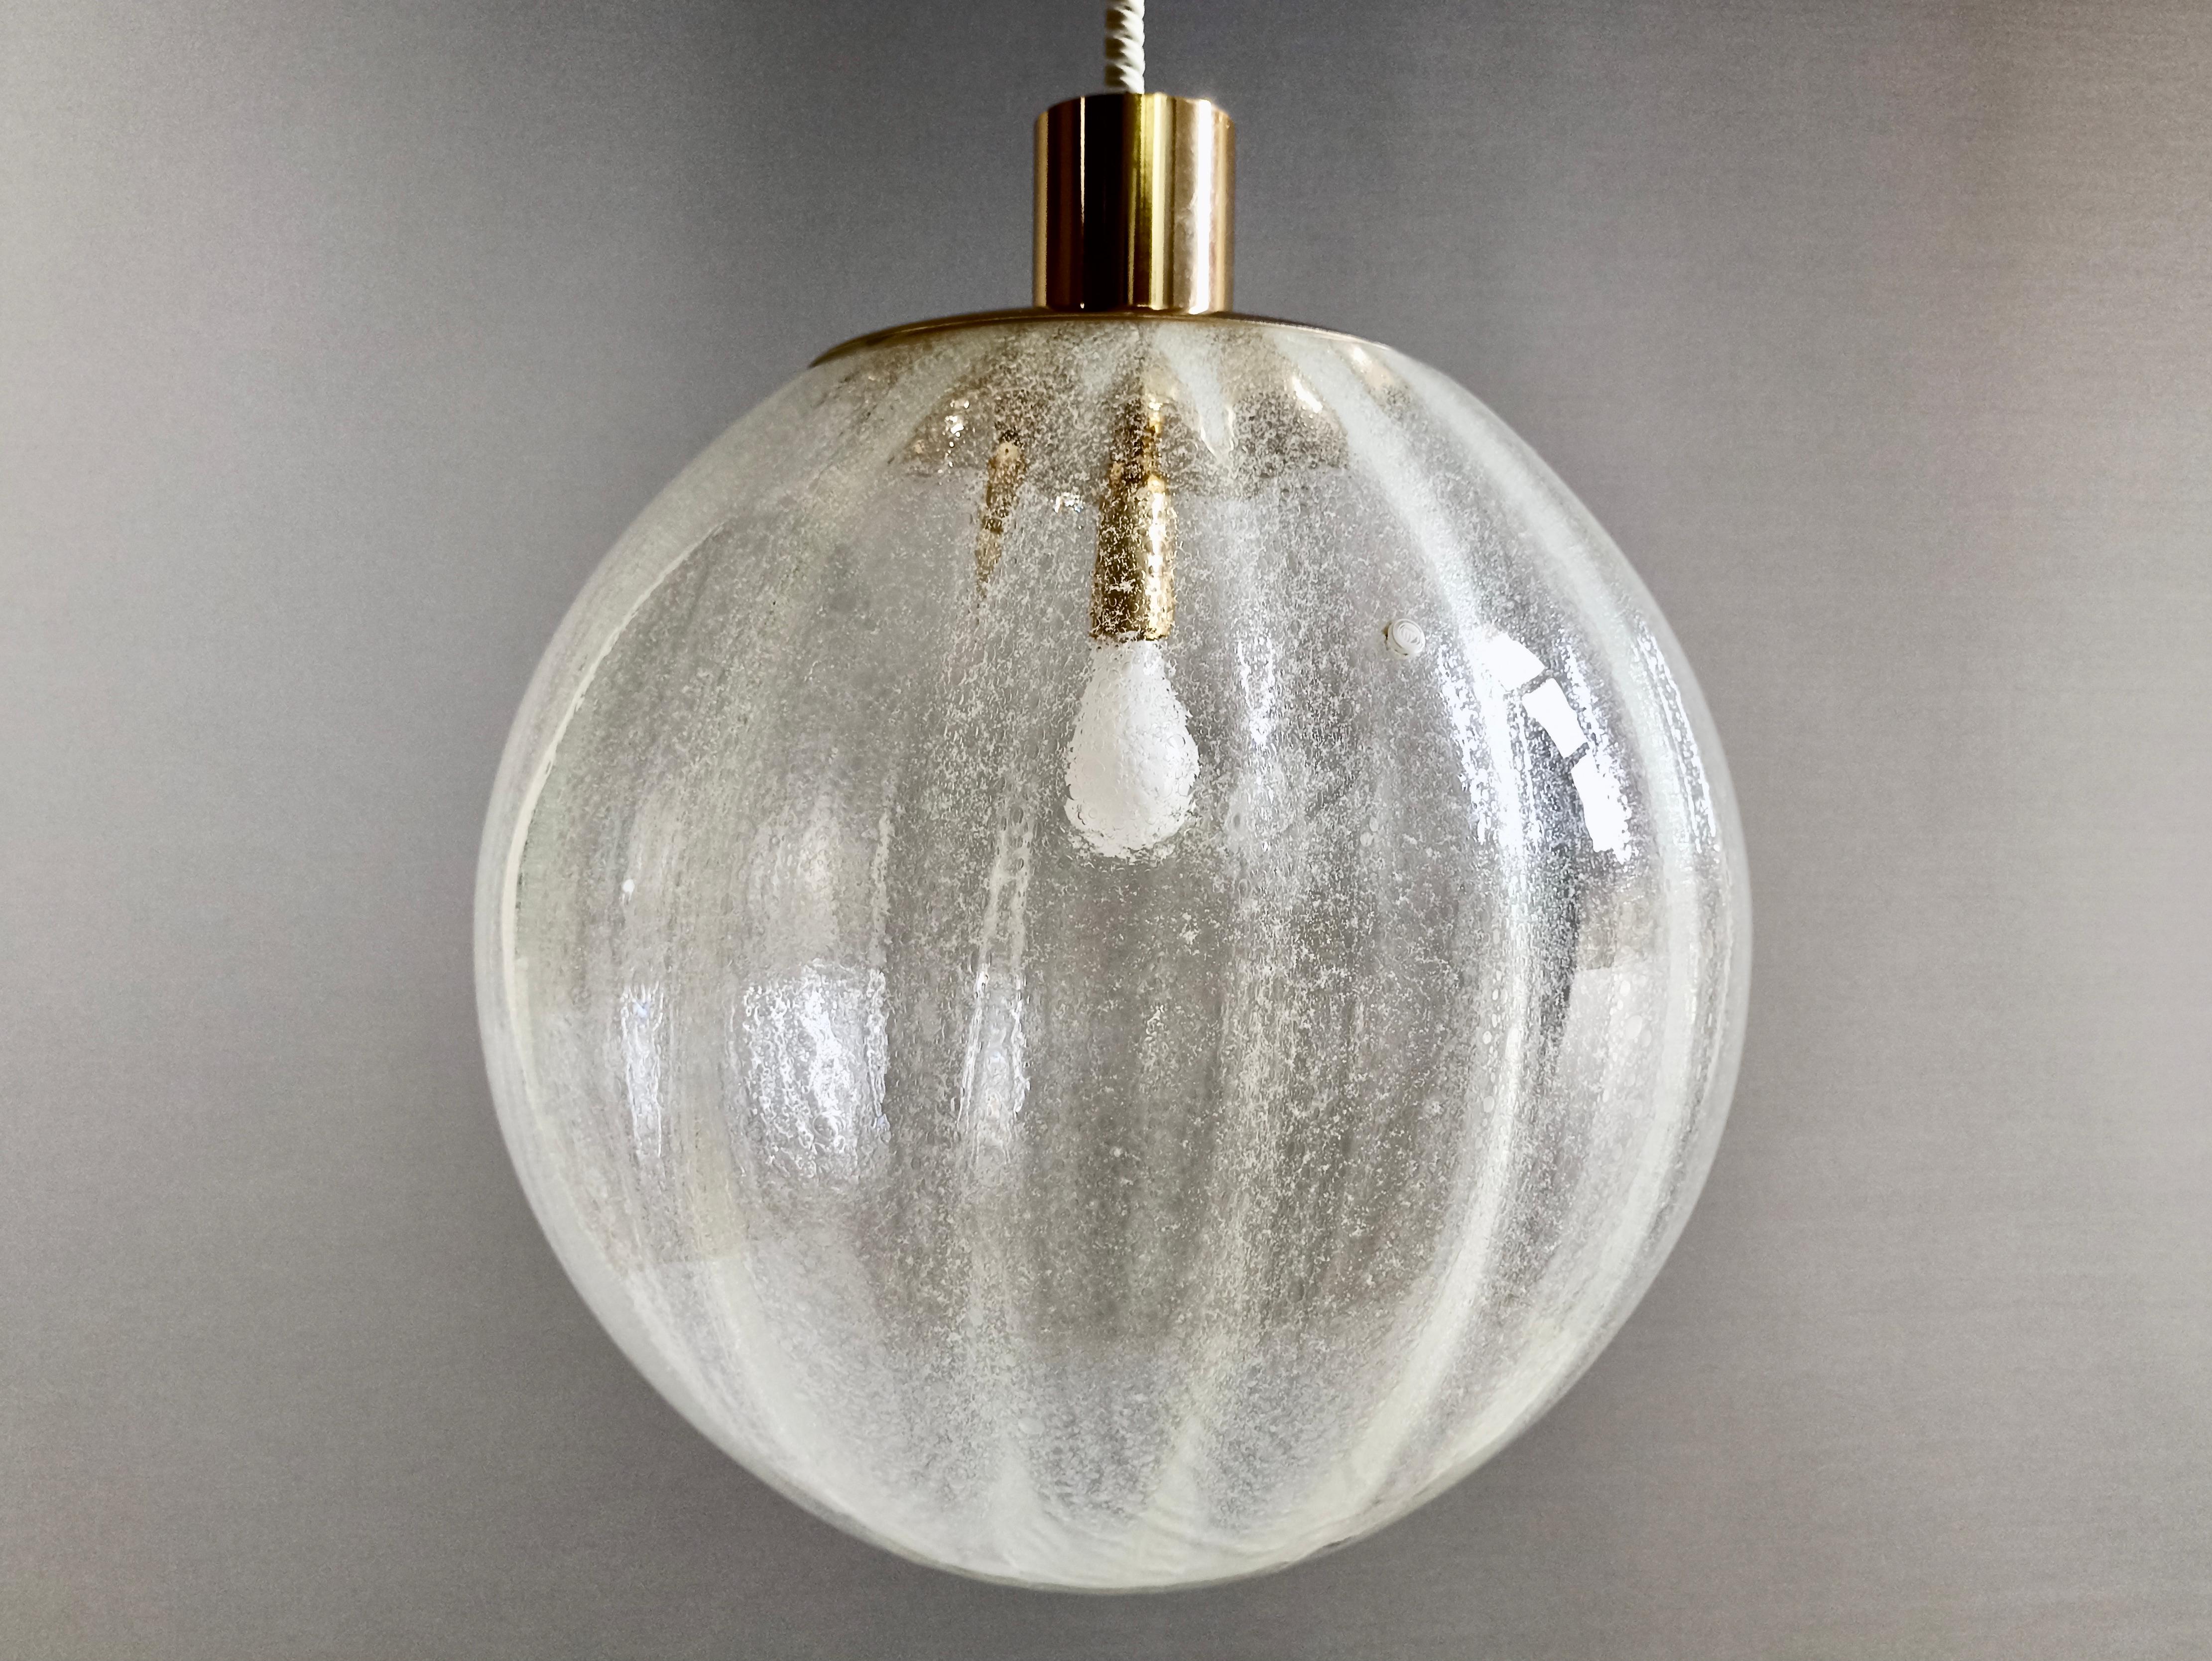 La Murrina 1970s large pendant lamp in Murano 'Pulegoso' art glass and gilded brass frame. The lamp is fixed to the ceiling with a steel wire and has a slightly downward pointing shape.
The surface of the clear glass sphere is as if wrapped in a